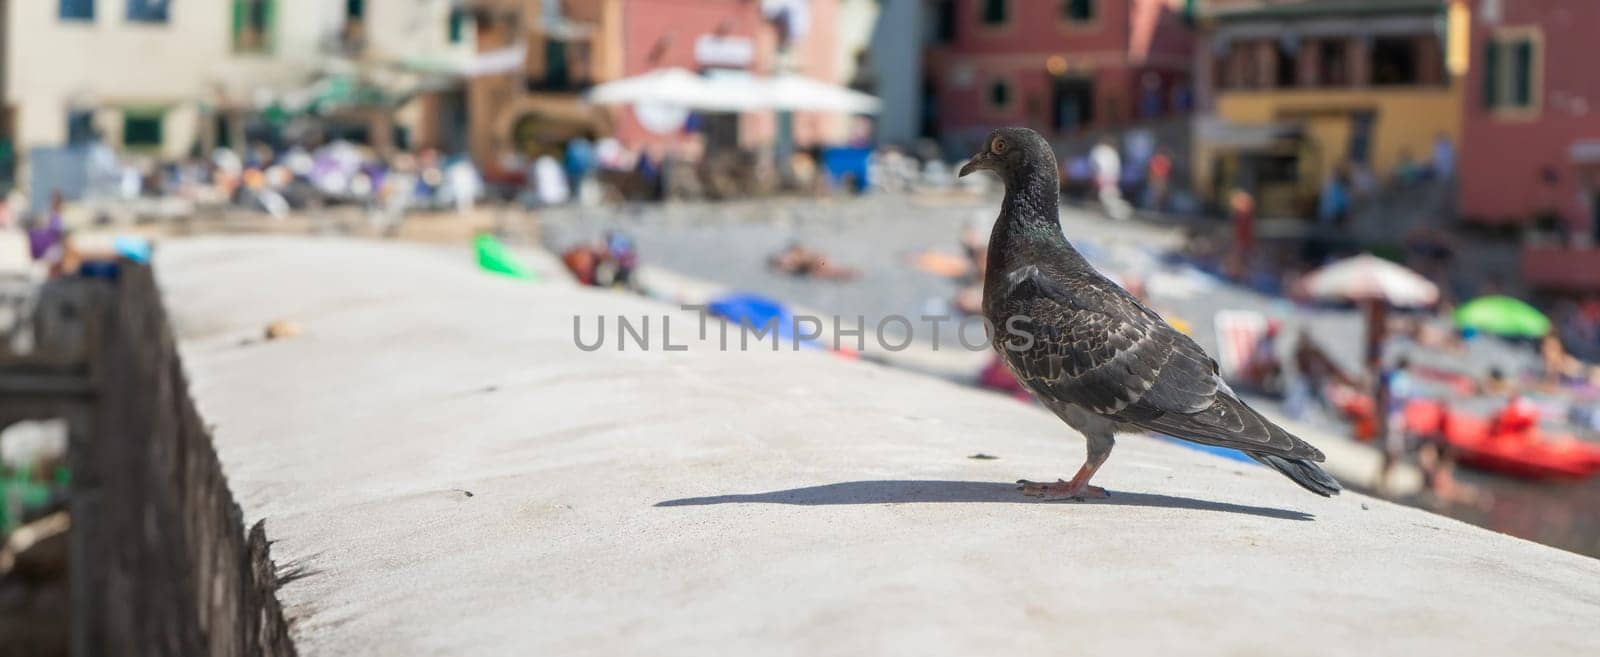 A lone pigeon commands the foreground, gazing across a sun-drenched piazza with blurred beachgoers and colorful buildings. The bird's sharp silhouette contrasts the lively summer backdrop, offering a unique perspective on the bustling coastal town life.